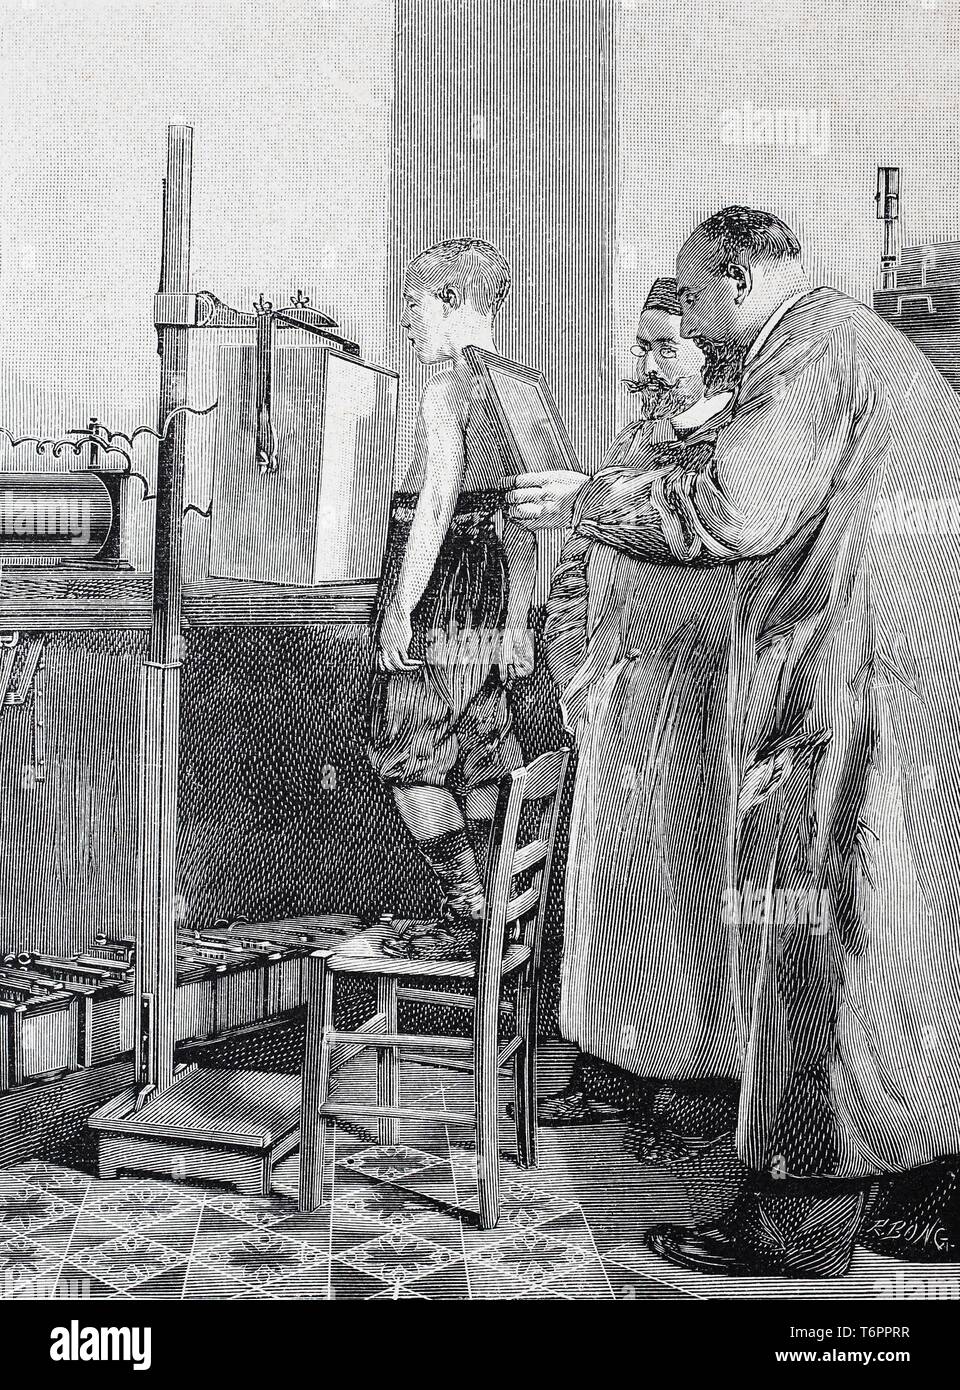 A patient being examined with X-rays, X-radiation, 1890, historical illustration, Germany Stock Photo